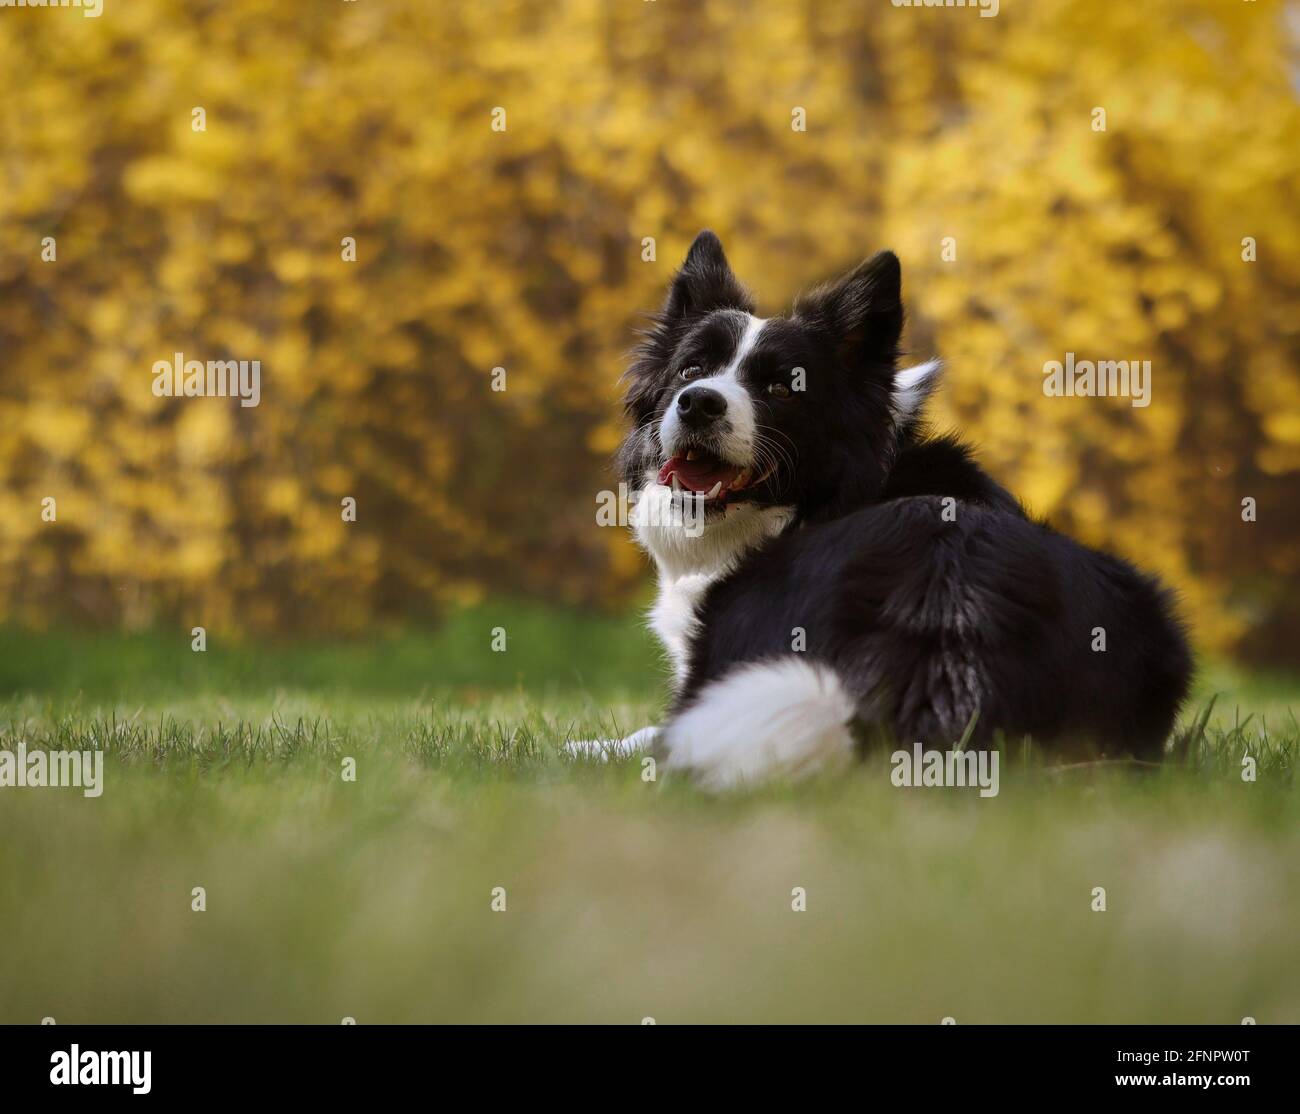 Border Collie with Cute Look in the Spring Park. Beautiful Black and White Dog Lies Down in Grass. Stock Photo